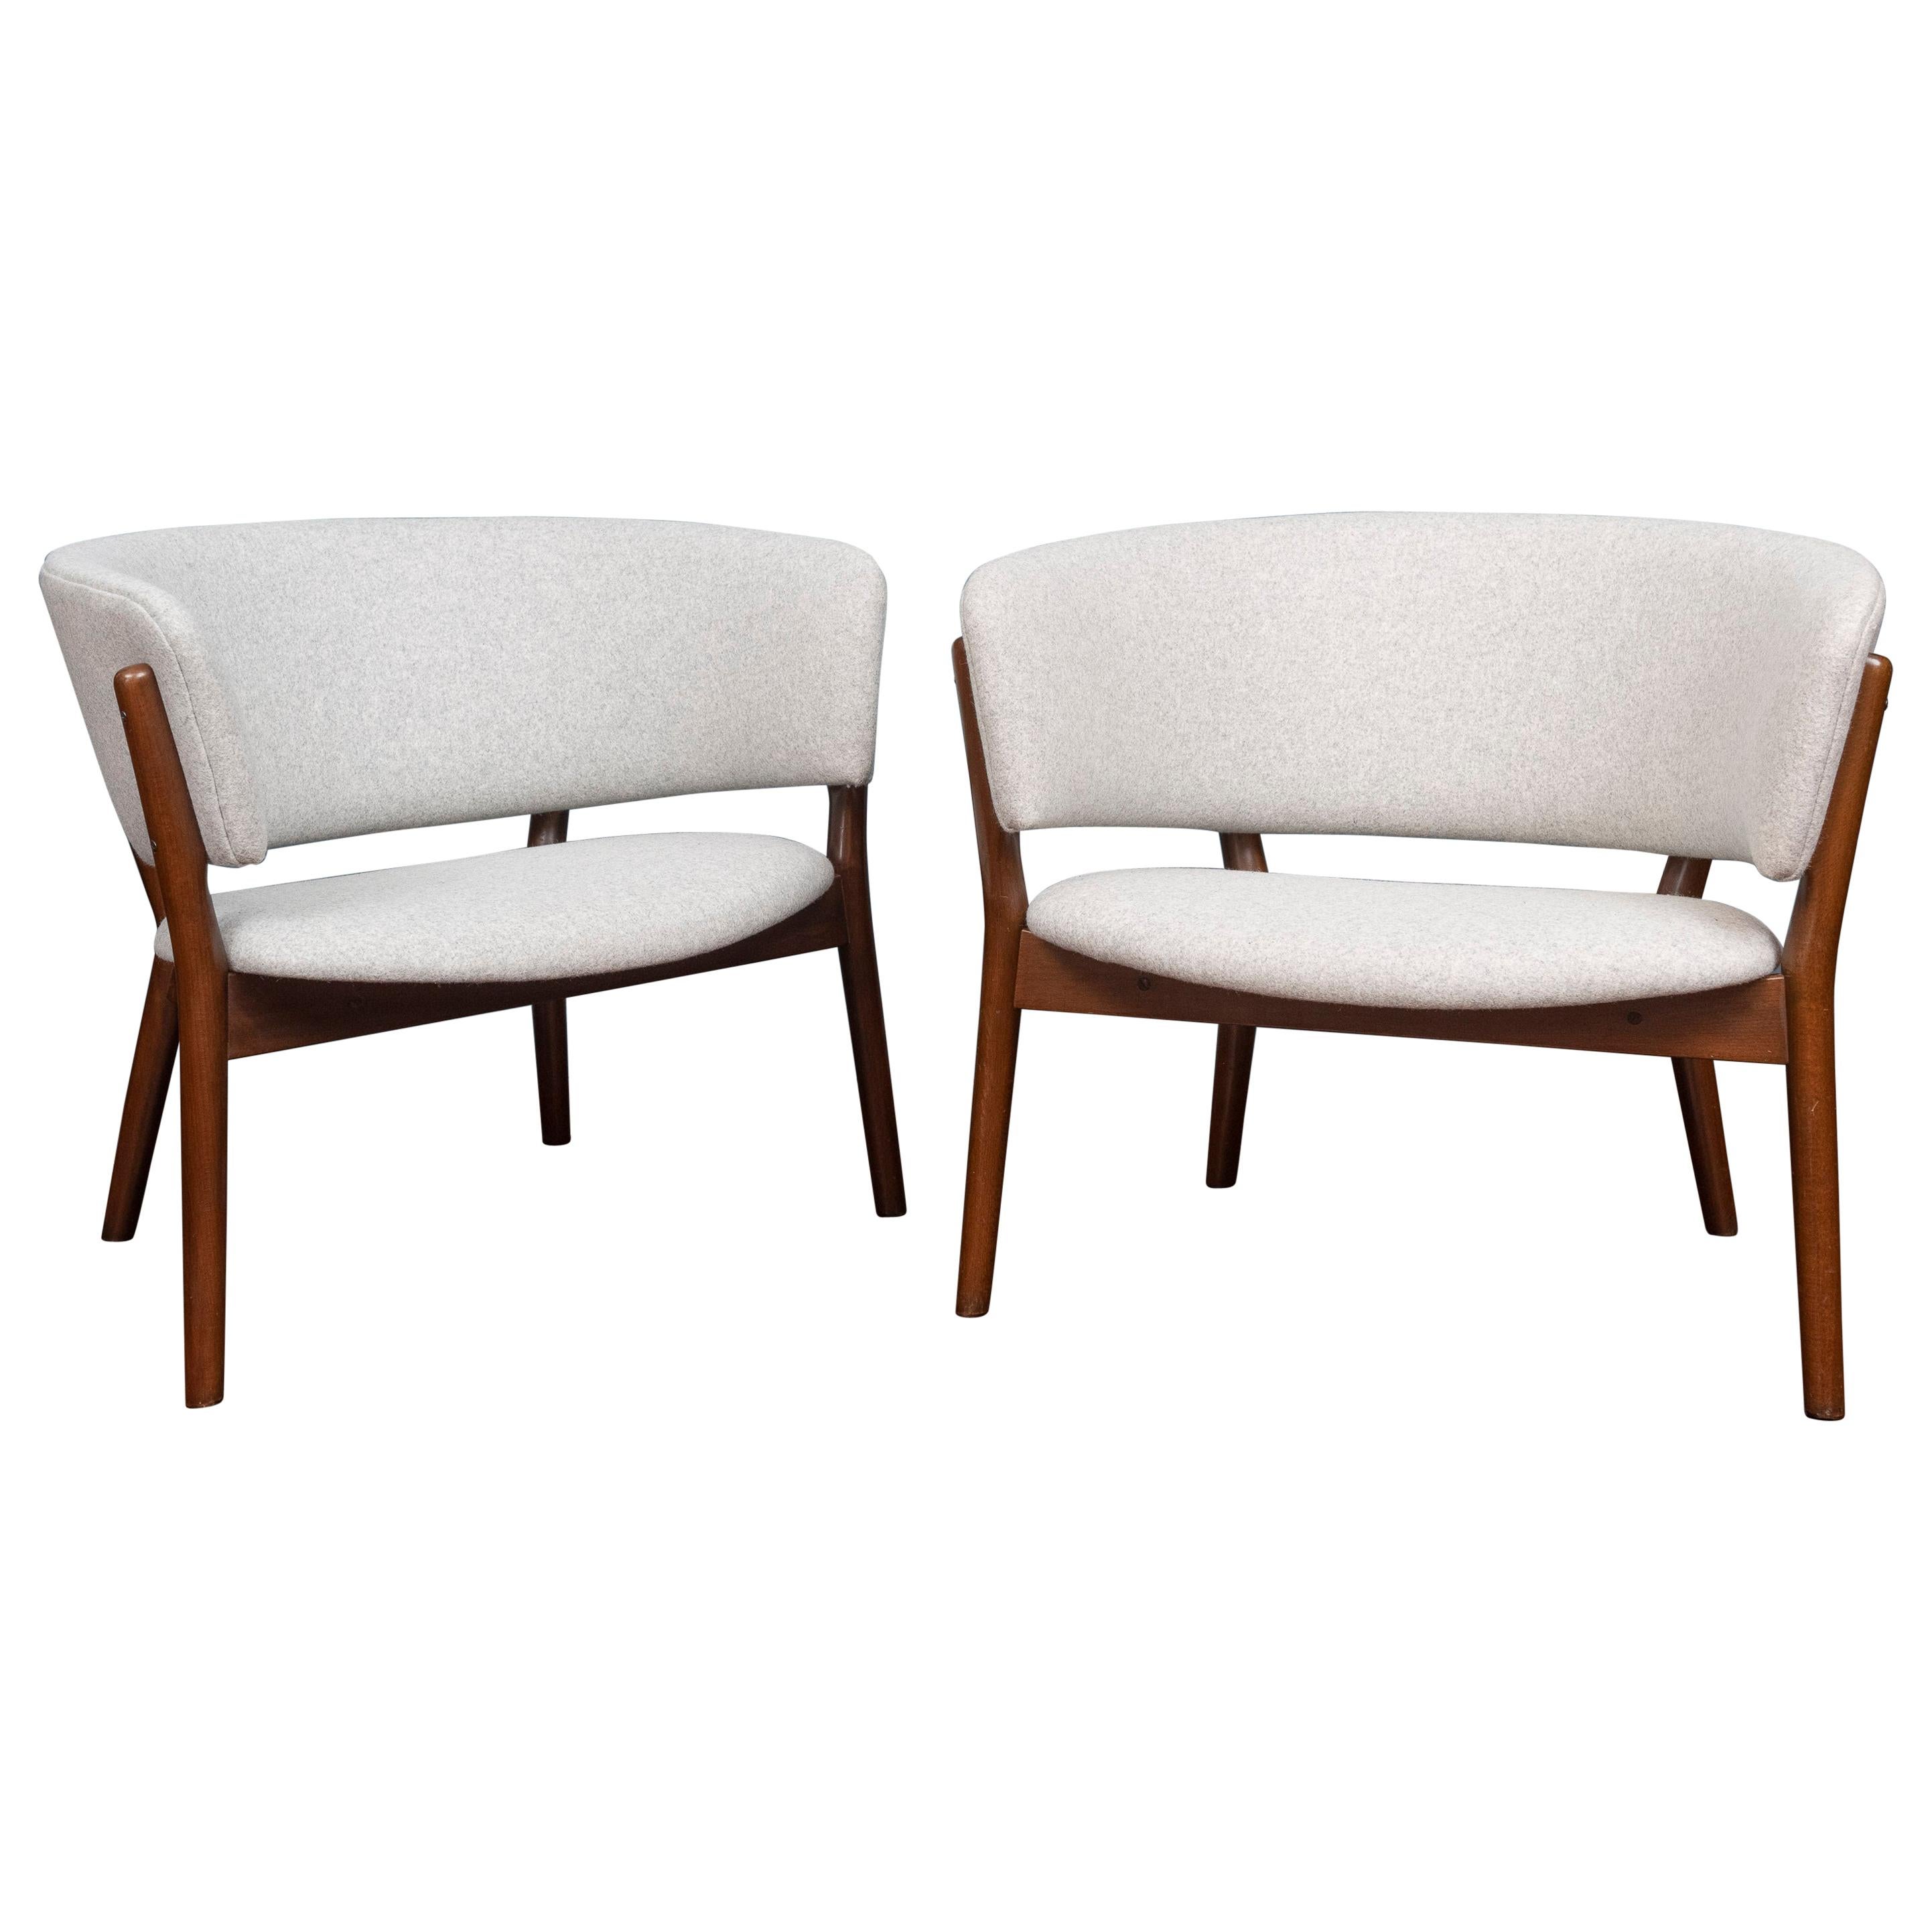 Nanna Ditzel Lounge Chairs 29 For Sale At 1stdibs